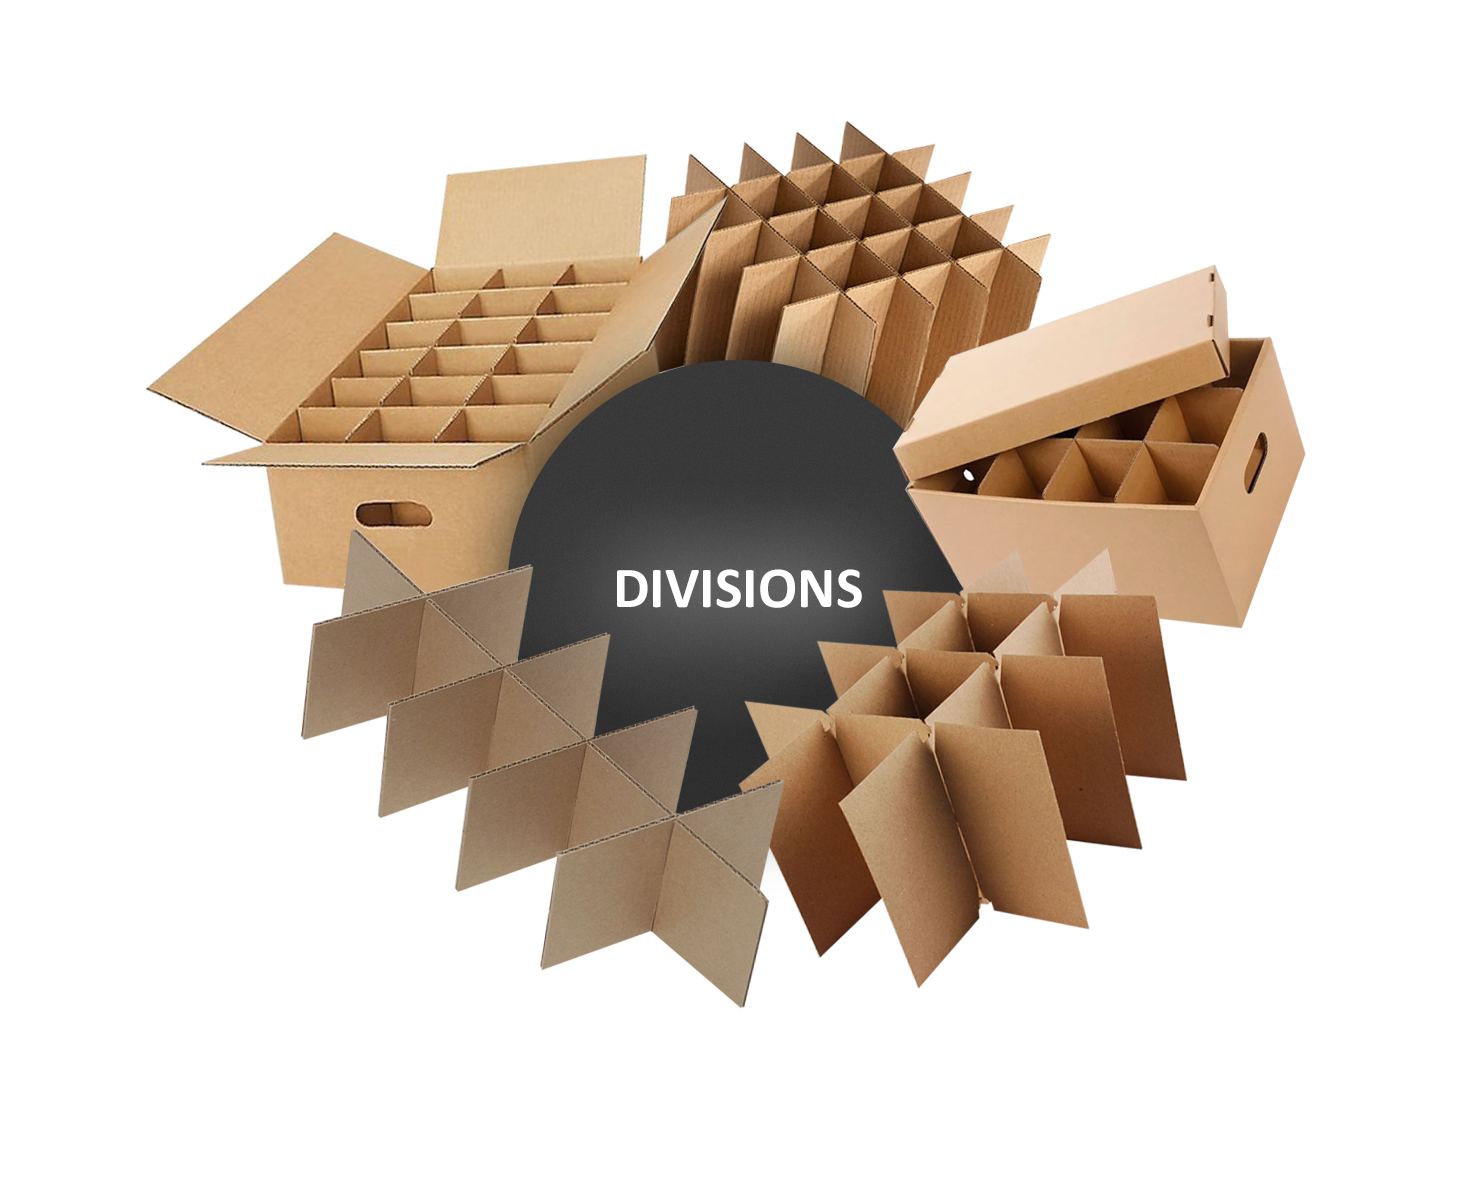 DIVISIONS